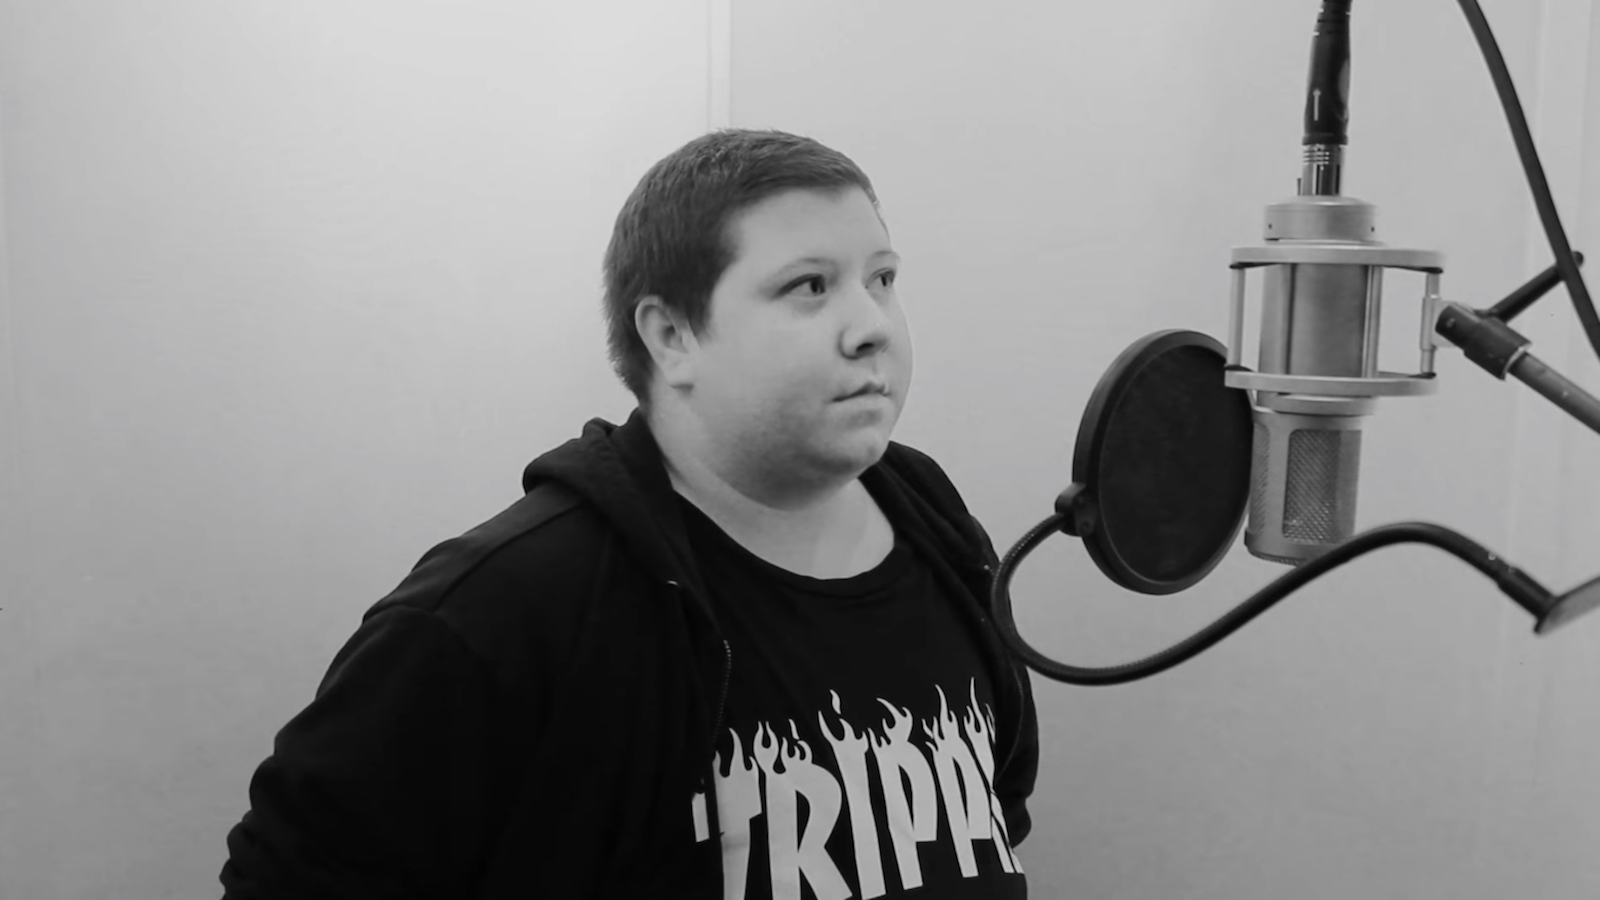 Soft Voice Changes while Narrating the Journey of a Transgender